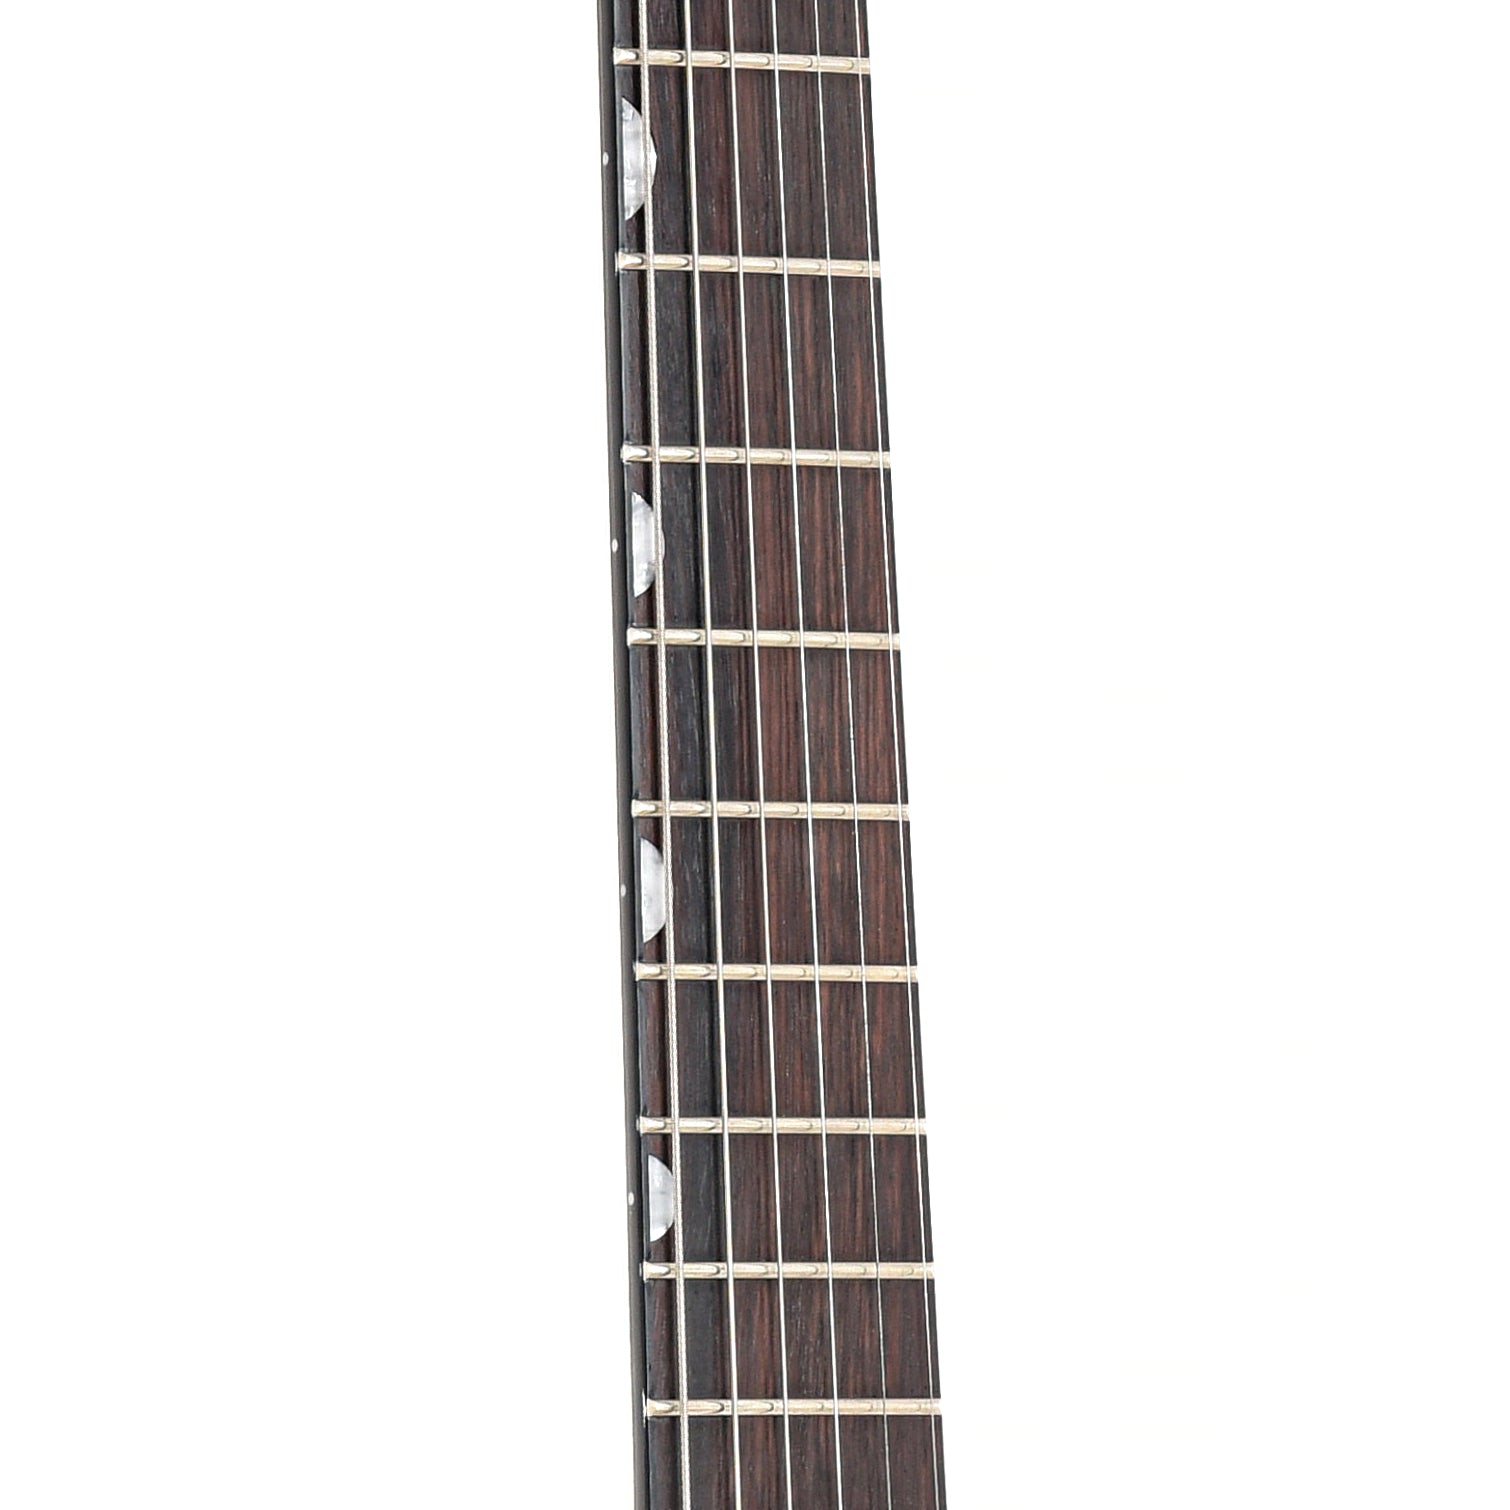 Image 5 of Gretsch G5410T Electromatic "Rat Rod", Matte Vintage White- SKU# G5410TMVW : Product Type Hollow Body Electric Guitars : Elderly Instruments